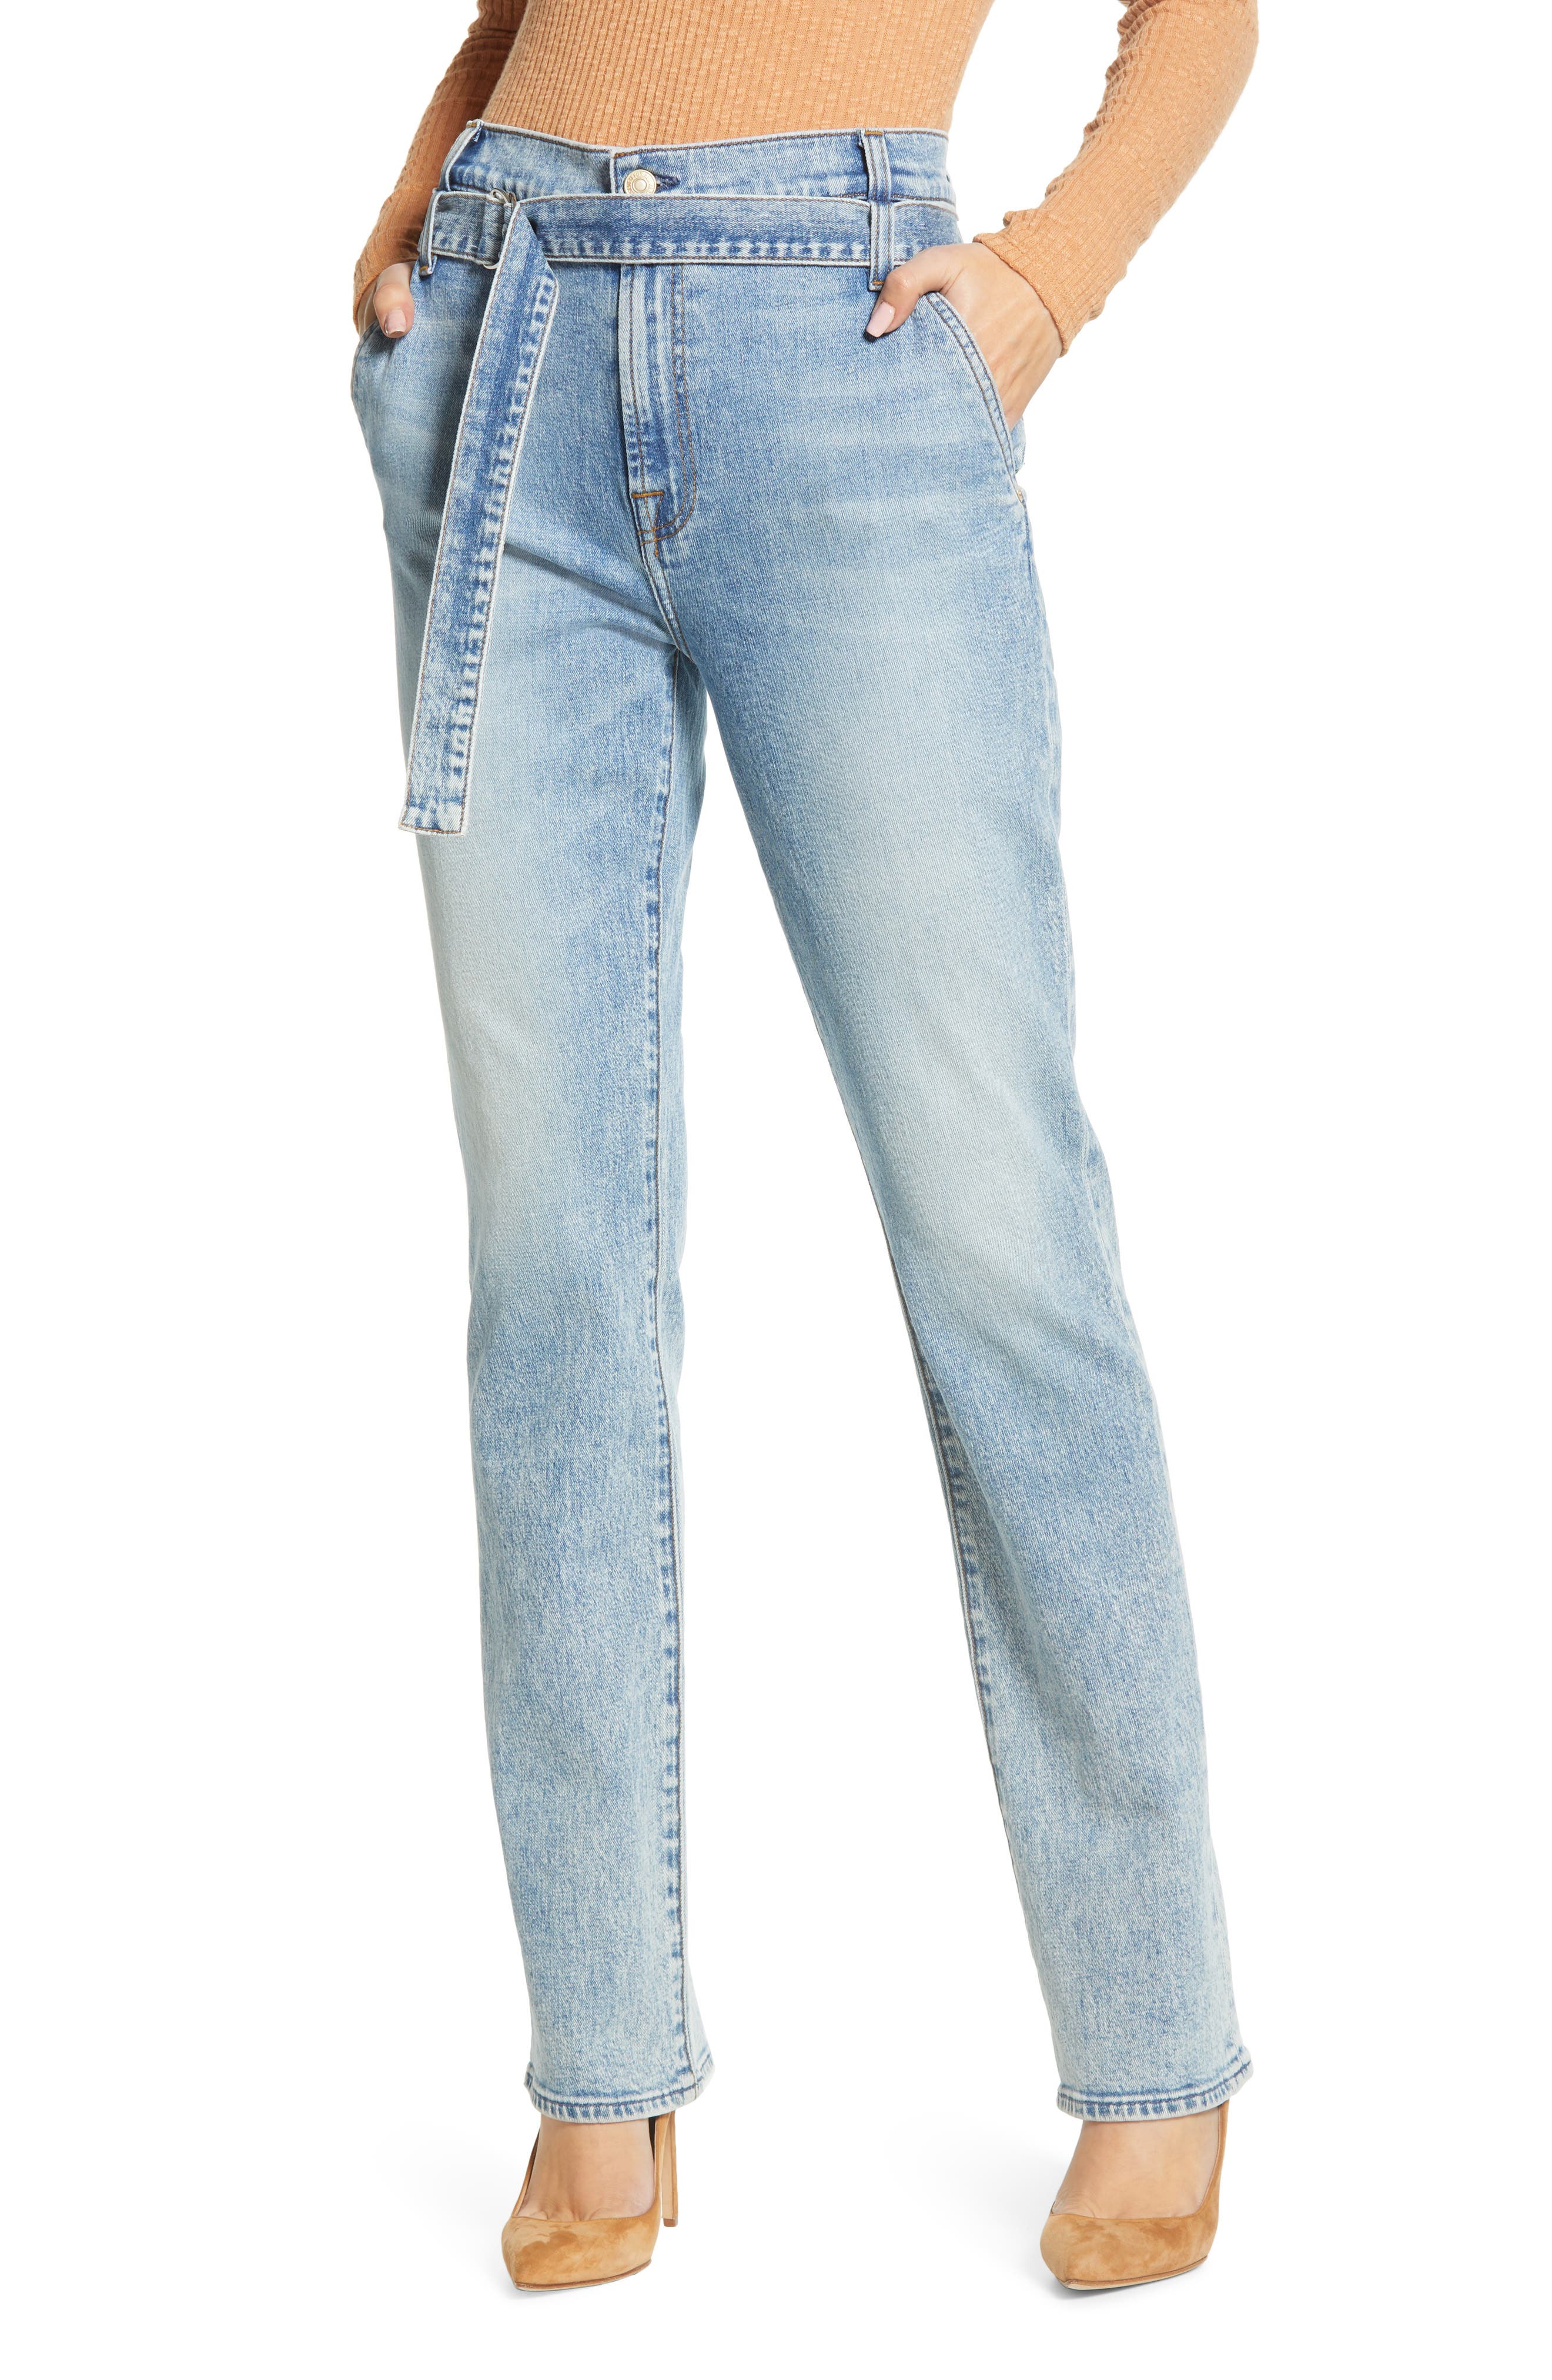 7 for all mankind paper bag jeans